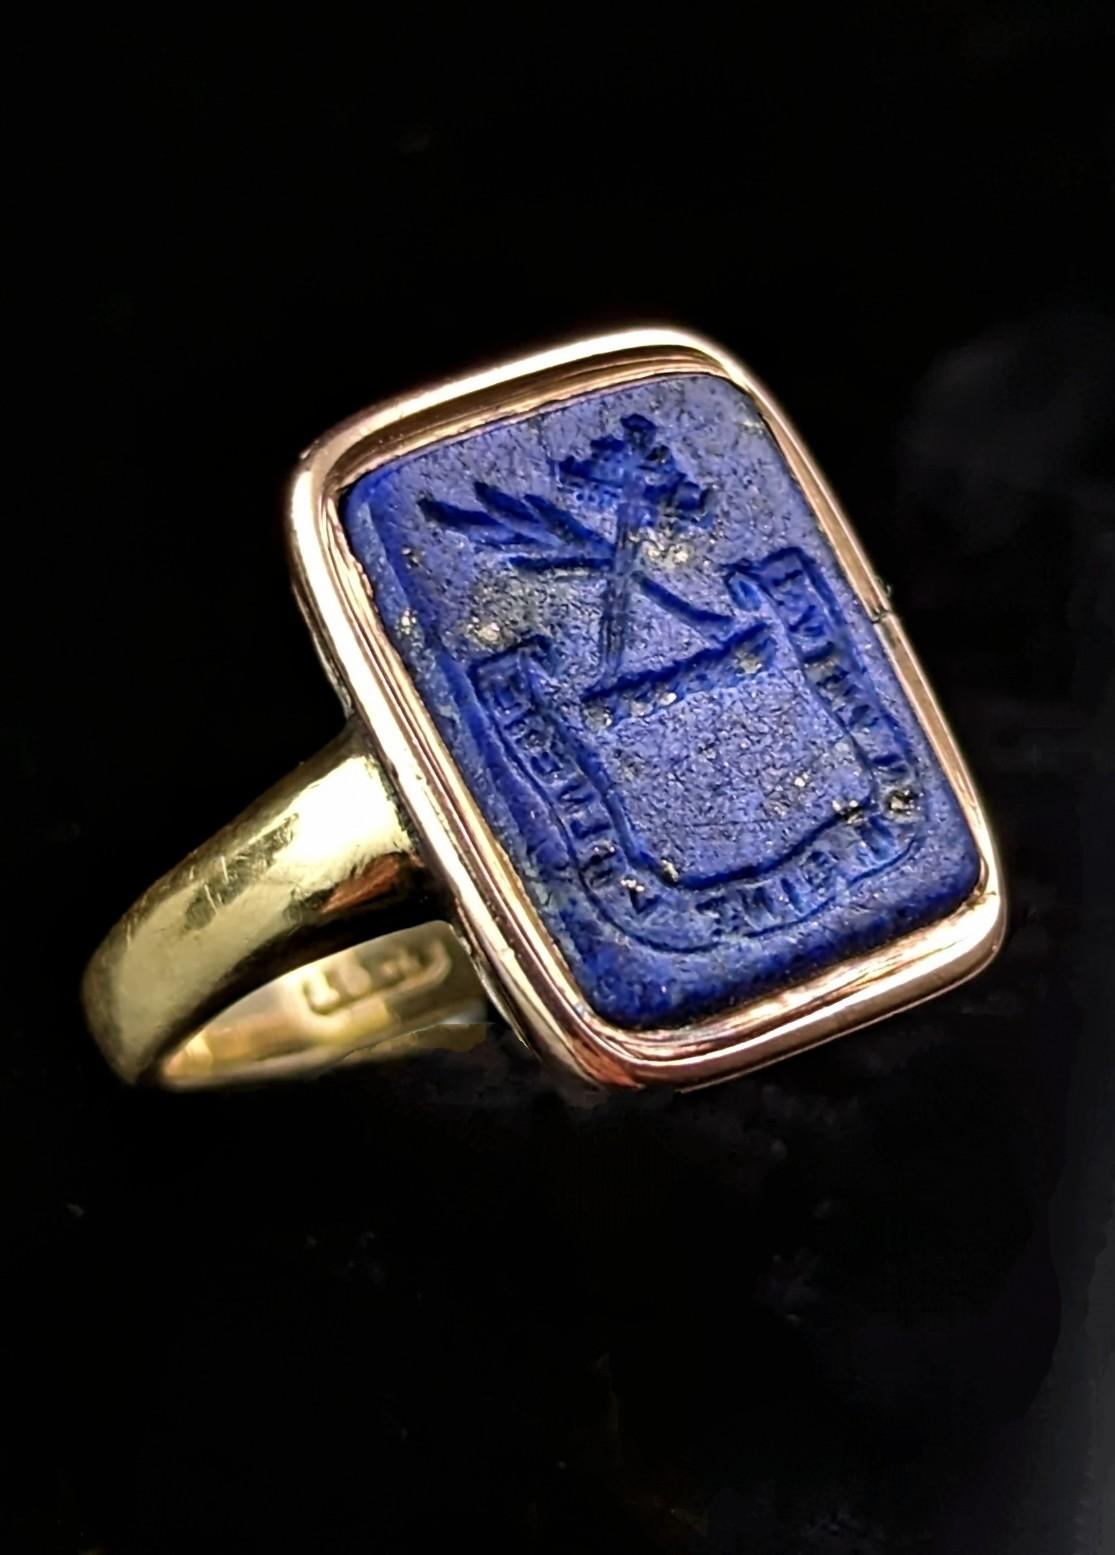 You can't help but be charmed by the history and mystery of this antique intaglio seal ring.

The ring is composed of a Lapis Lazuli Georgian era intaglio seal on a later antique 15ct gold shank.

The lapis Lazuli has lots of gold running through